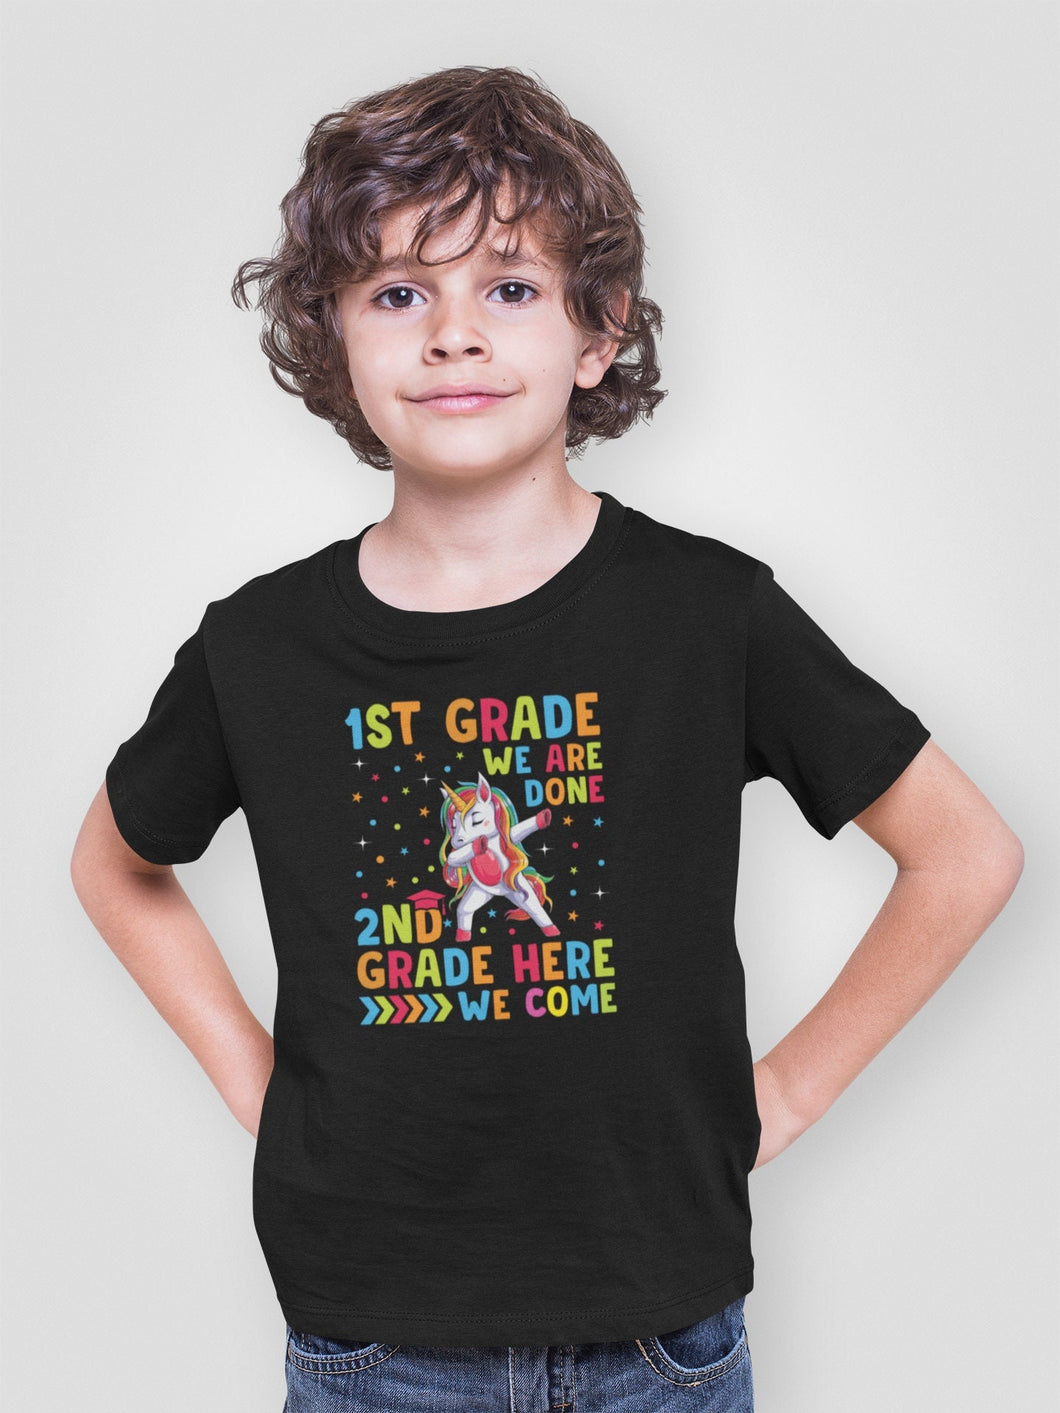 1st Grade We Are Done 2nd Grade Here We Come Shirt, Second Grade Shirt, Kinder Graduate 2022 Shirt